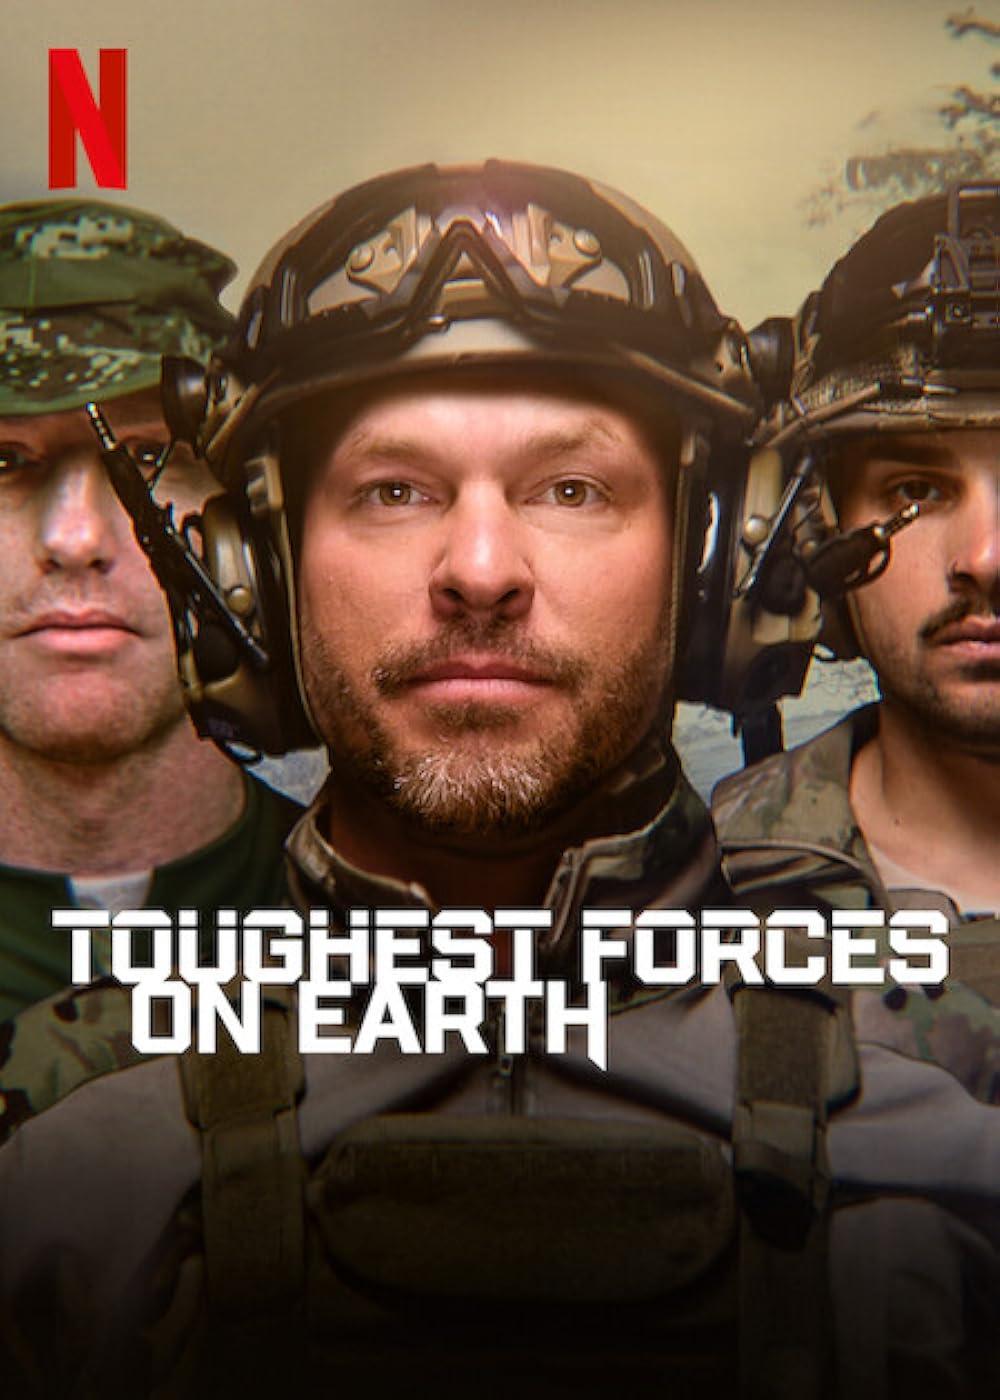 Toughest Forces on Earth (Netflix) – May 22Toughest Forces on Earth is a compelling documentary series that takes viewers on a global journey with three former special operations soldiers: US Army Ranger Ryan Bates, British Special Forces operator Dean Stott, and US Navy SEAL Cameron Fath. This eight-part series provides a rare, inside look into the rigorous training, advanced tactics, and sophisticated weaponry of the world’s most elite and secretive military units.